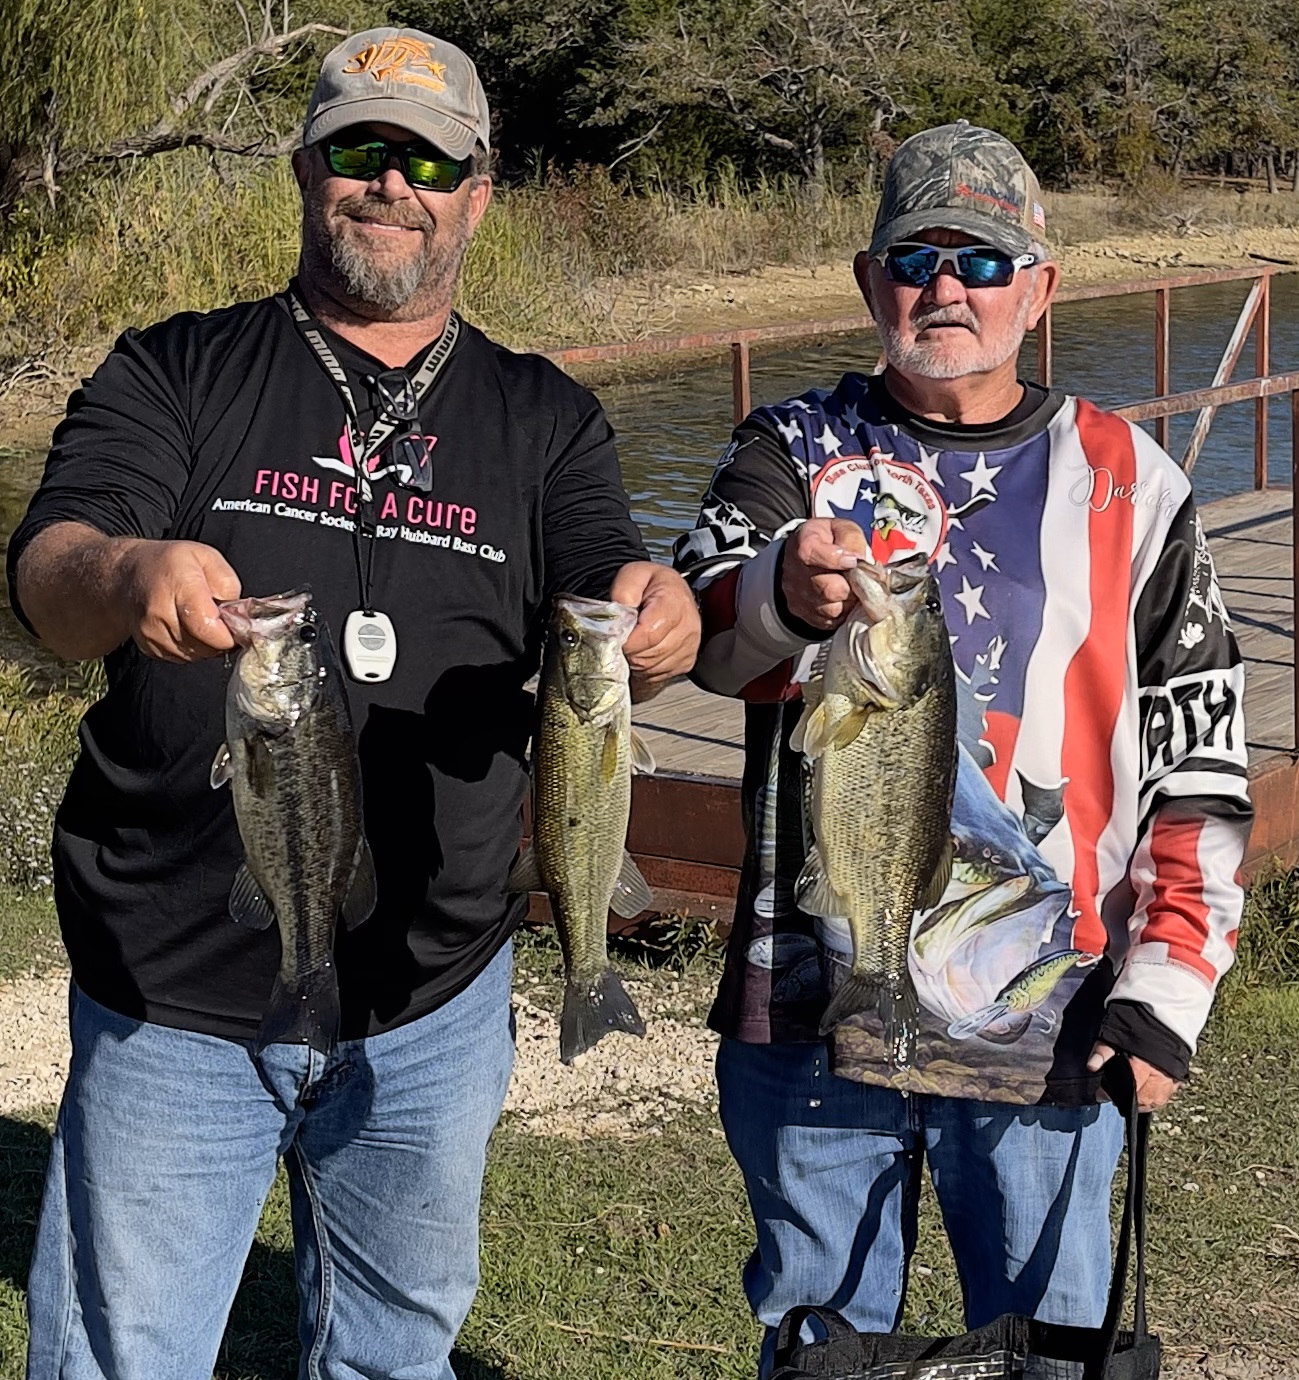 Click to see results from Lake Amon Carter